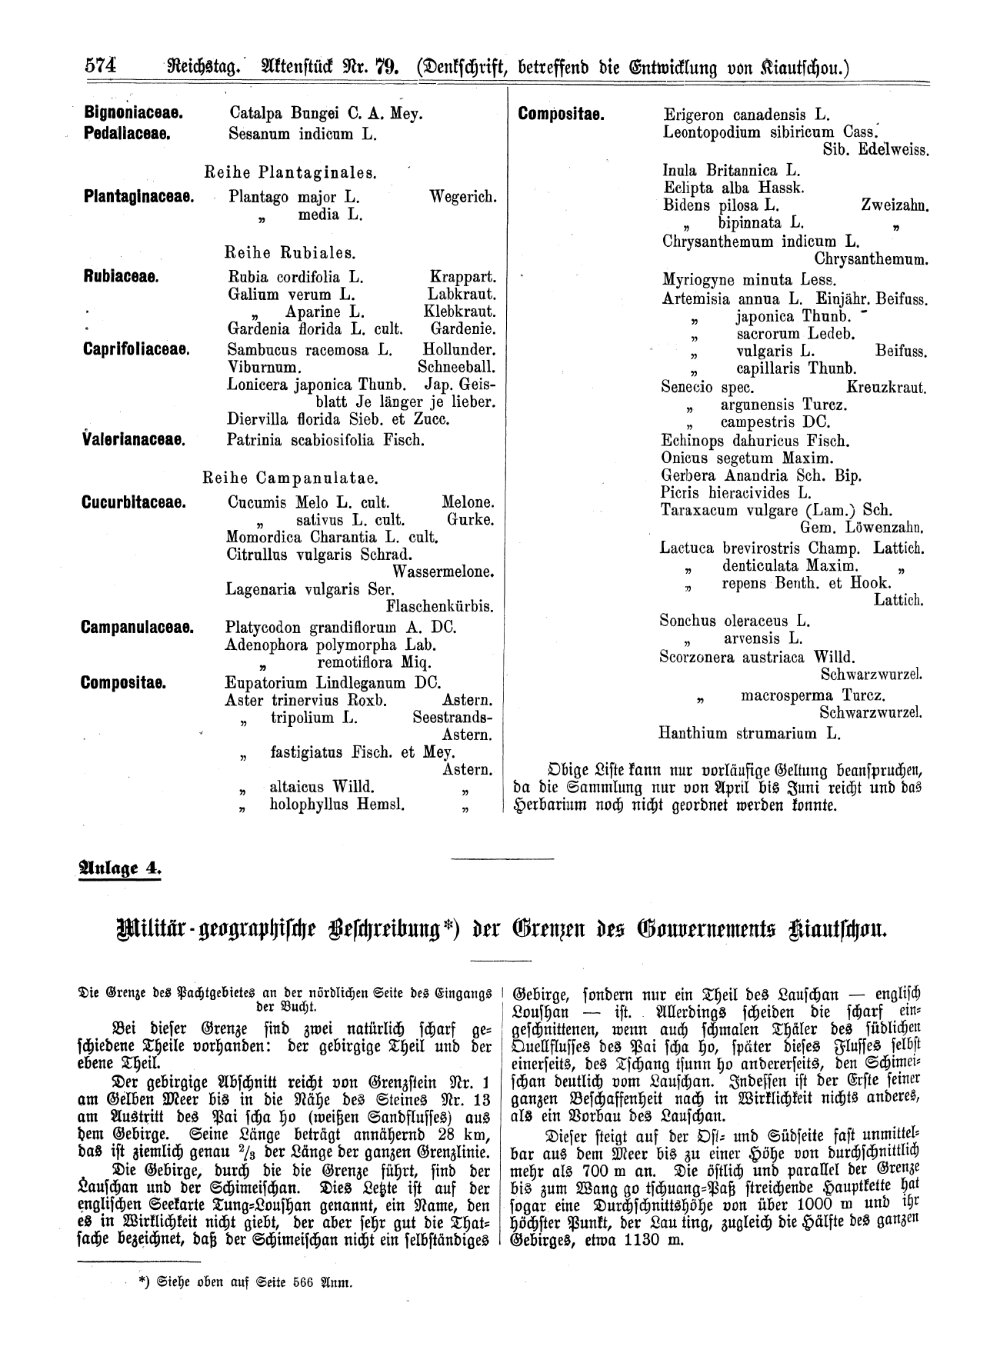 Scan of page 574